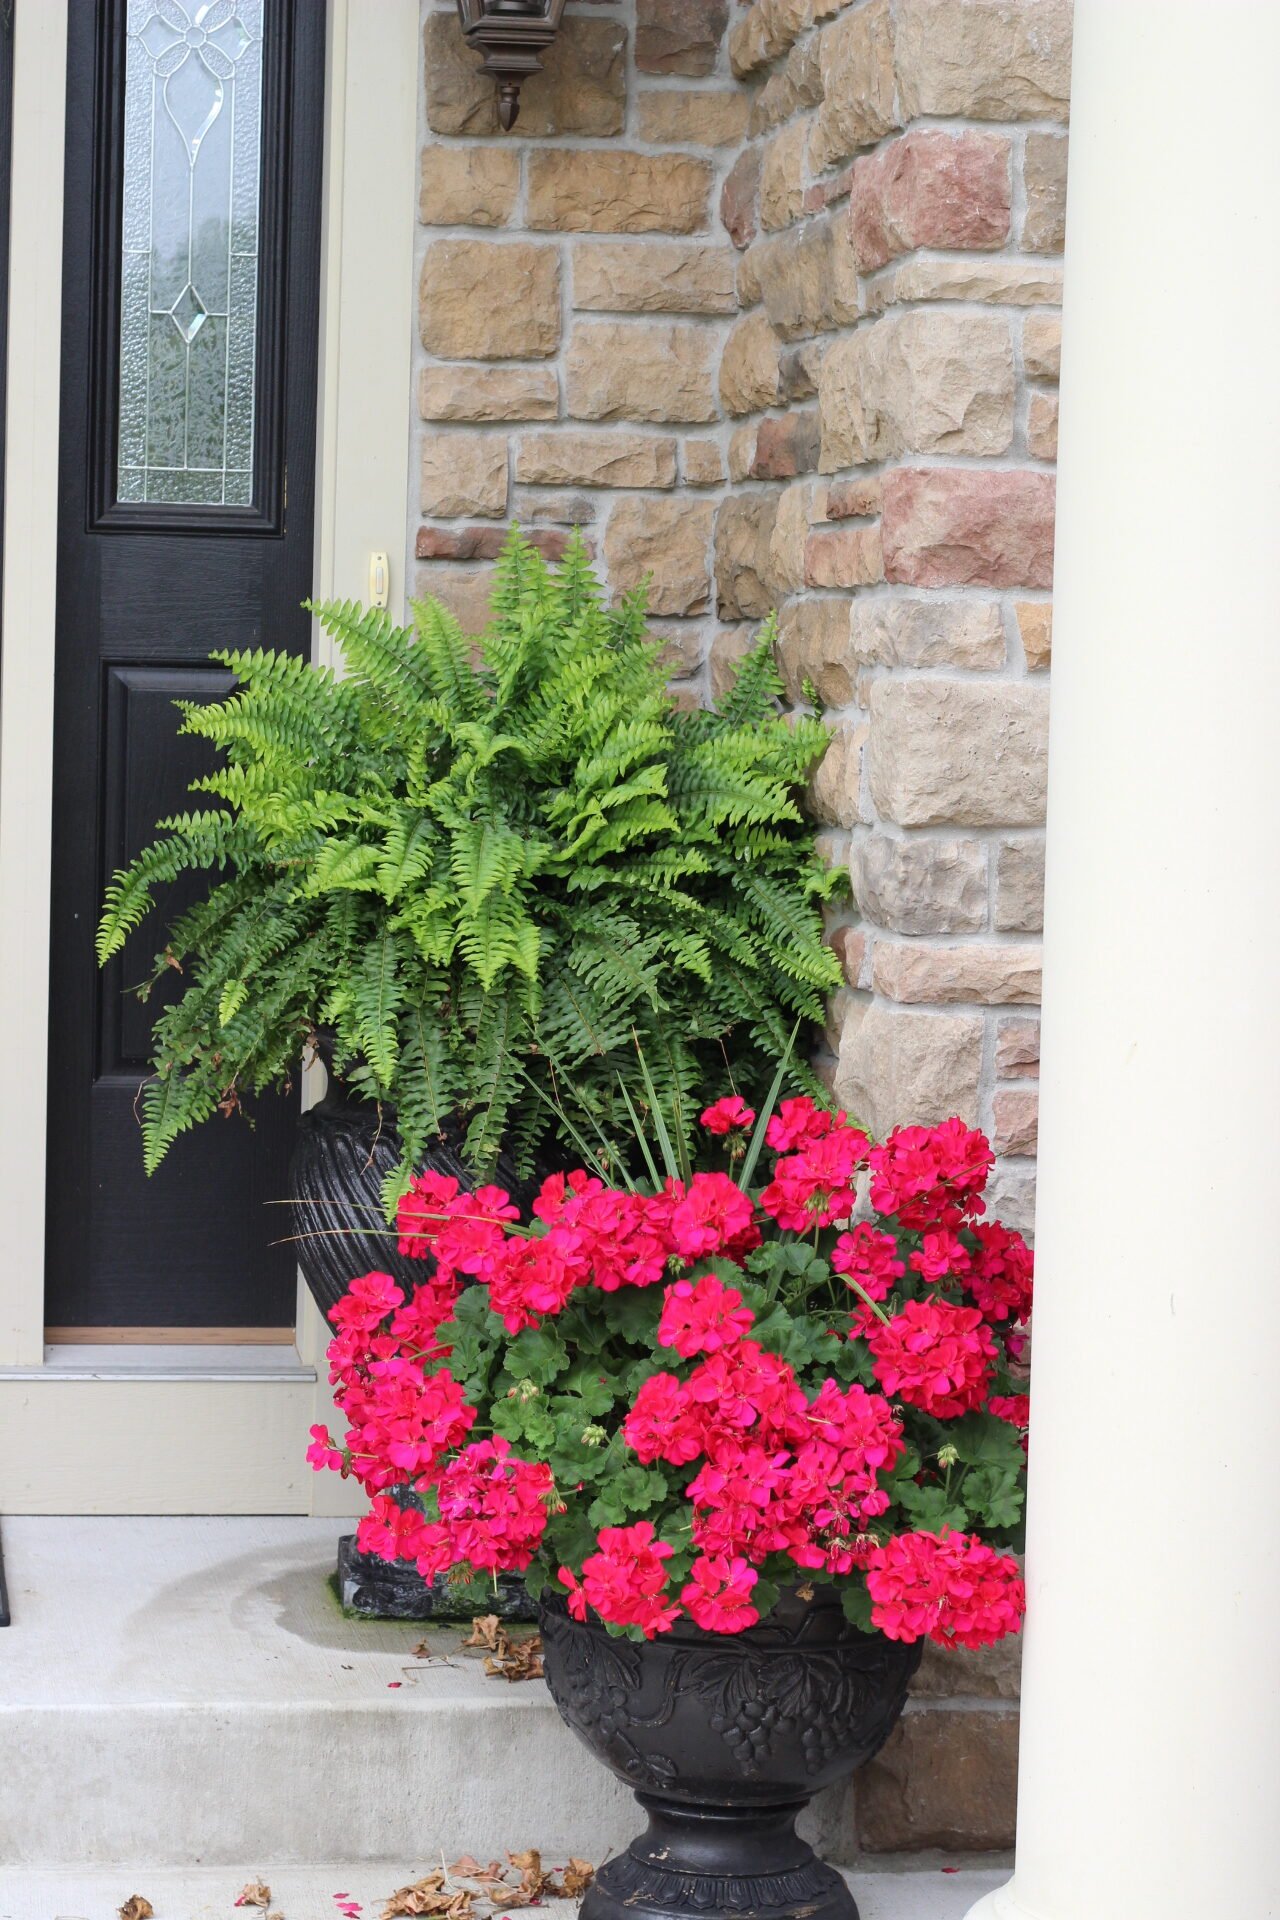 A planter on the lower stair containing red geraniums.  The planter on the upper stair contained a fern.